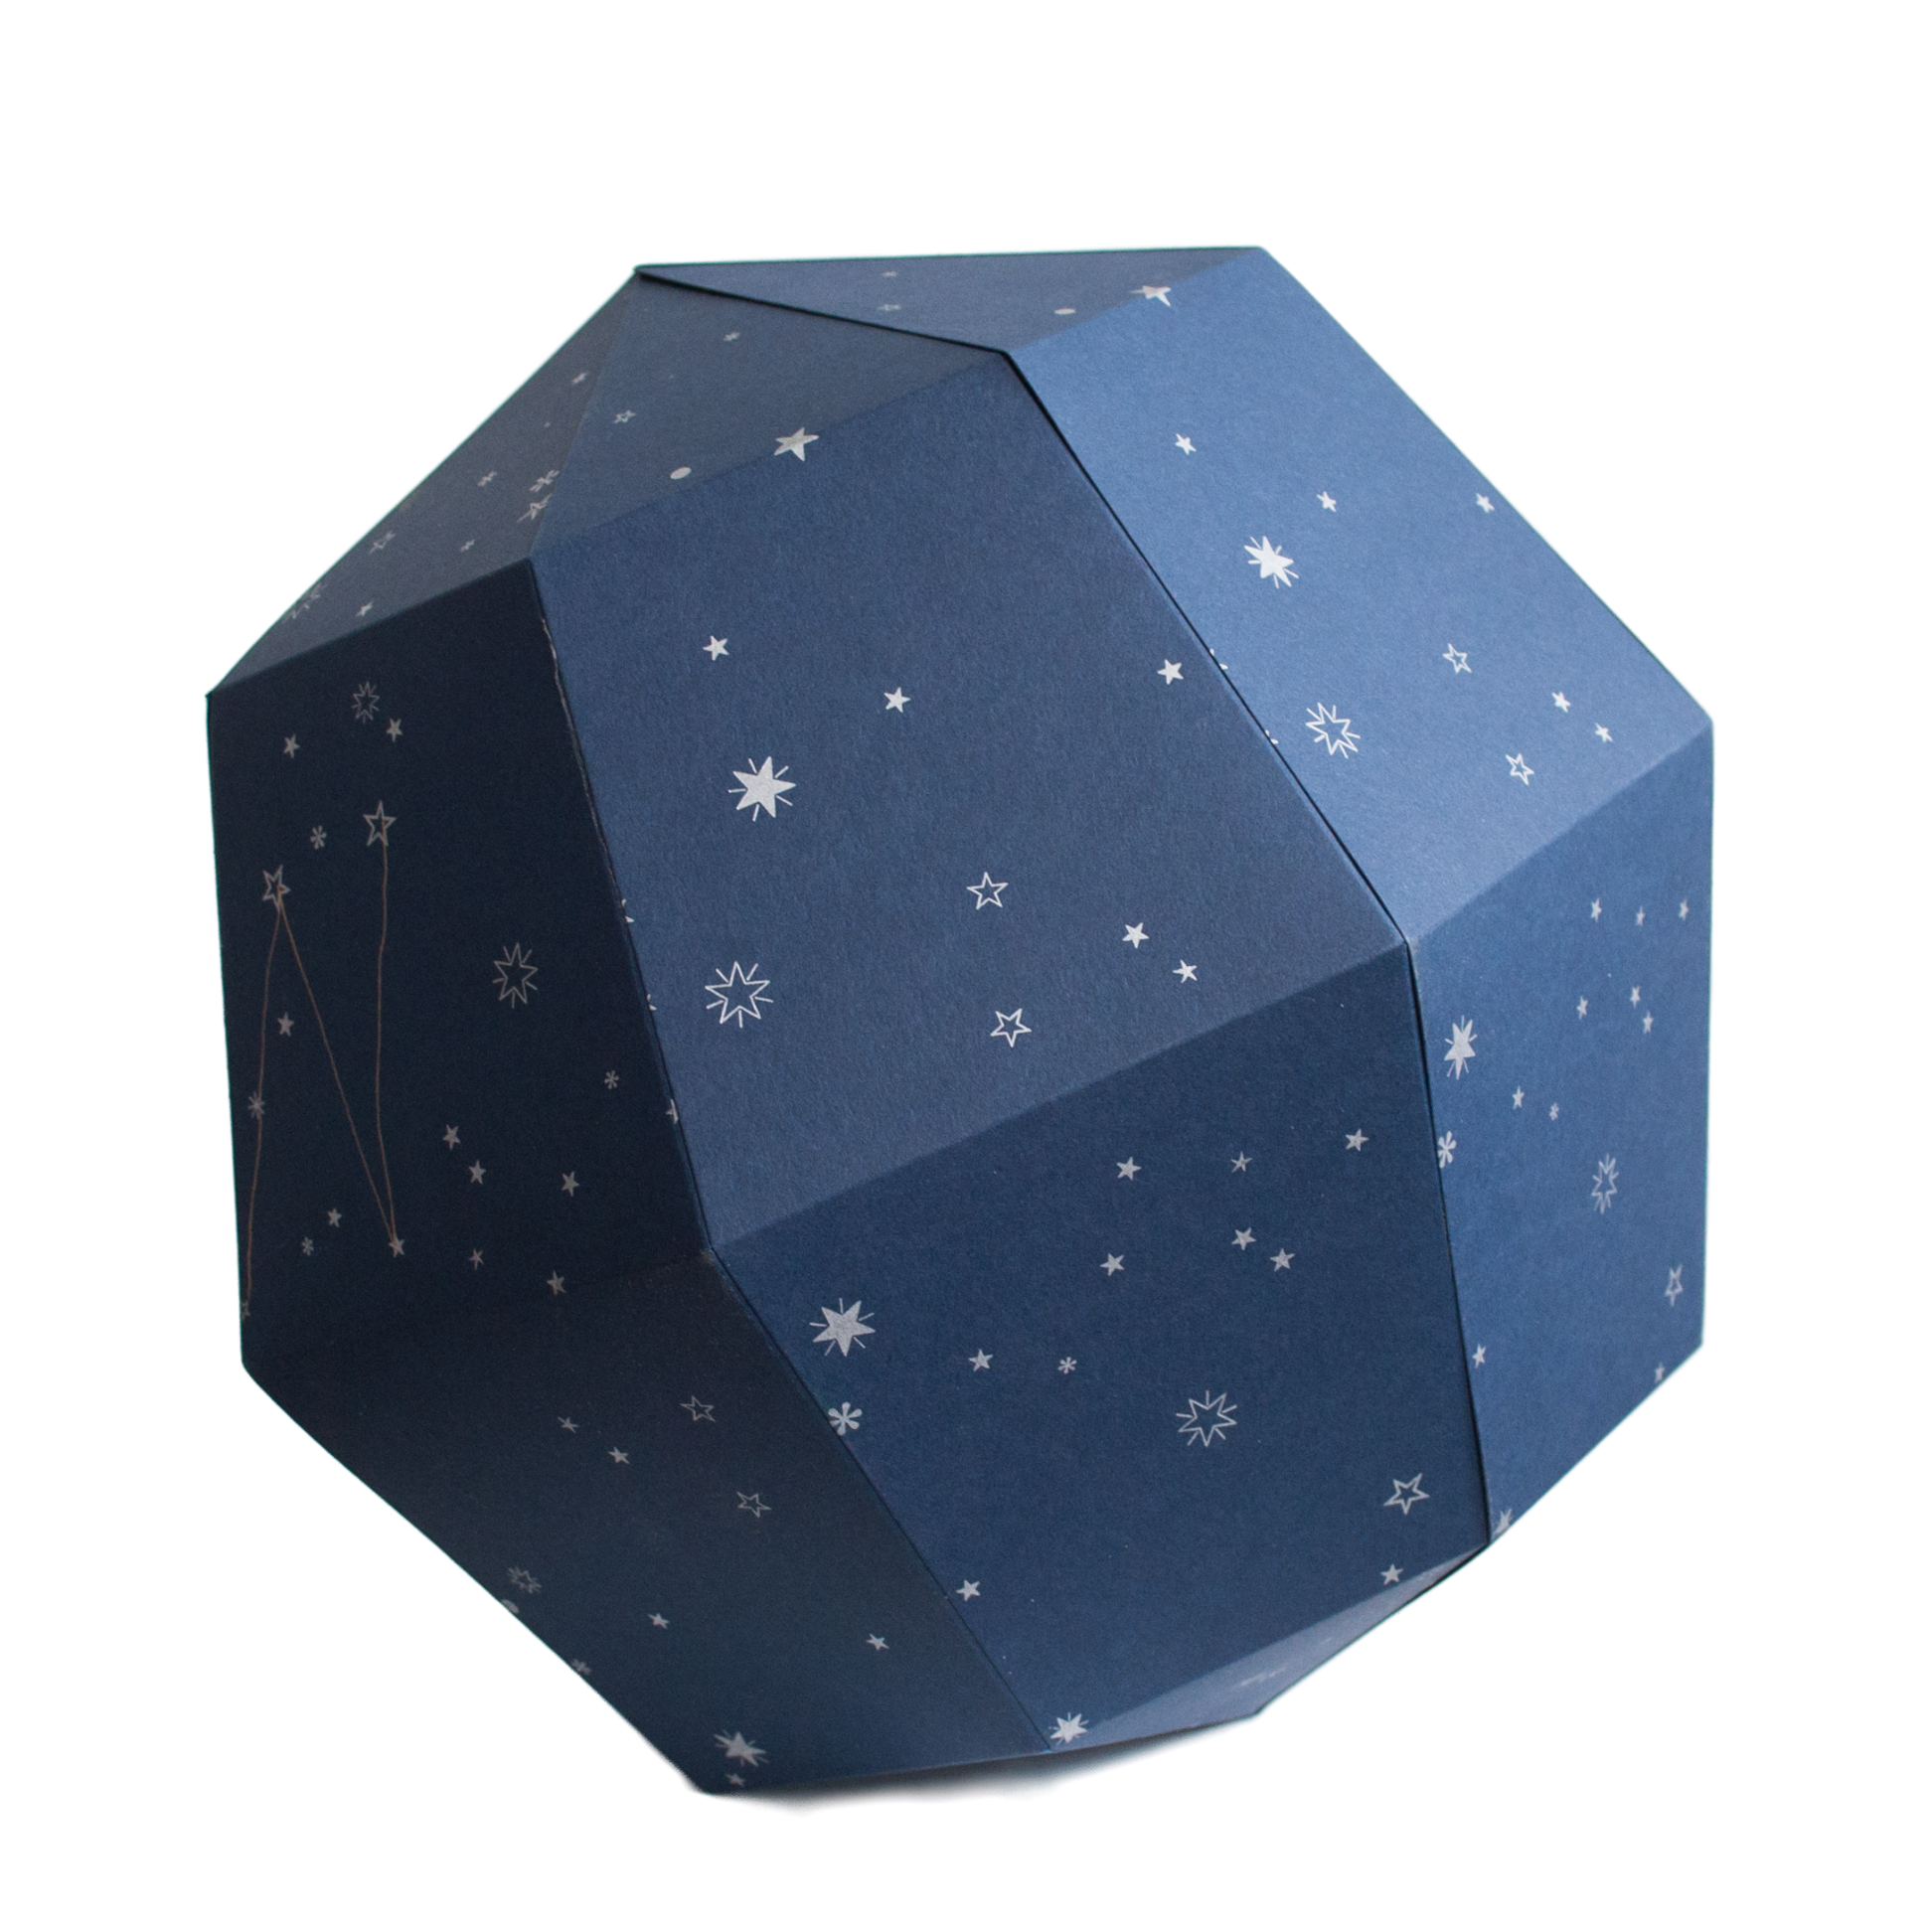 Constellationglobe.png